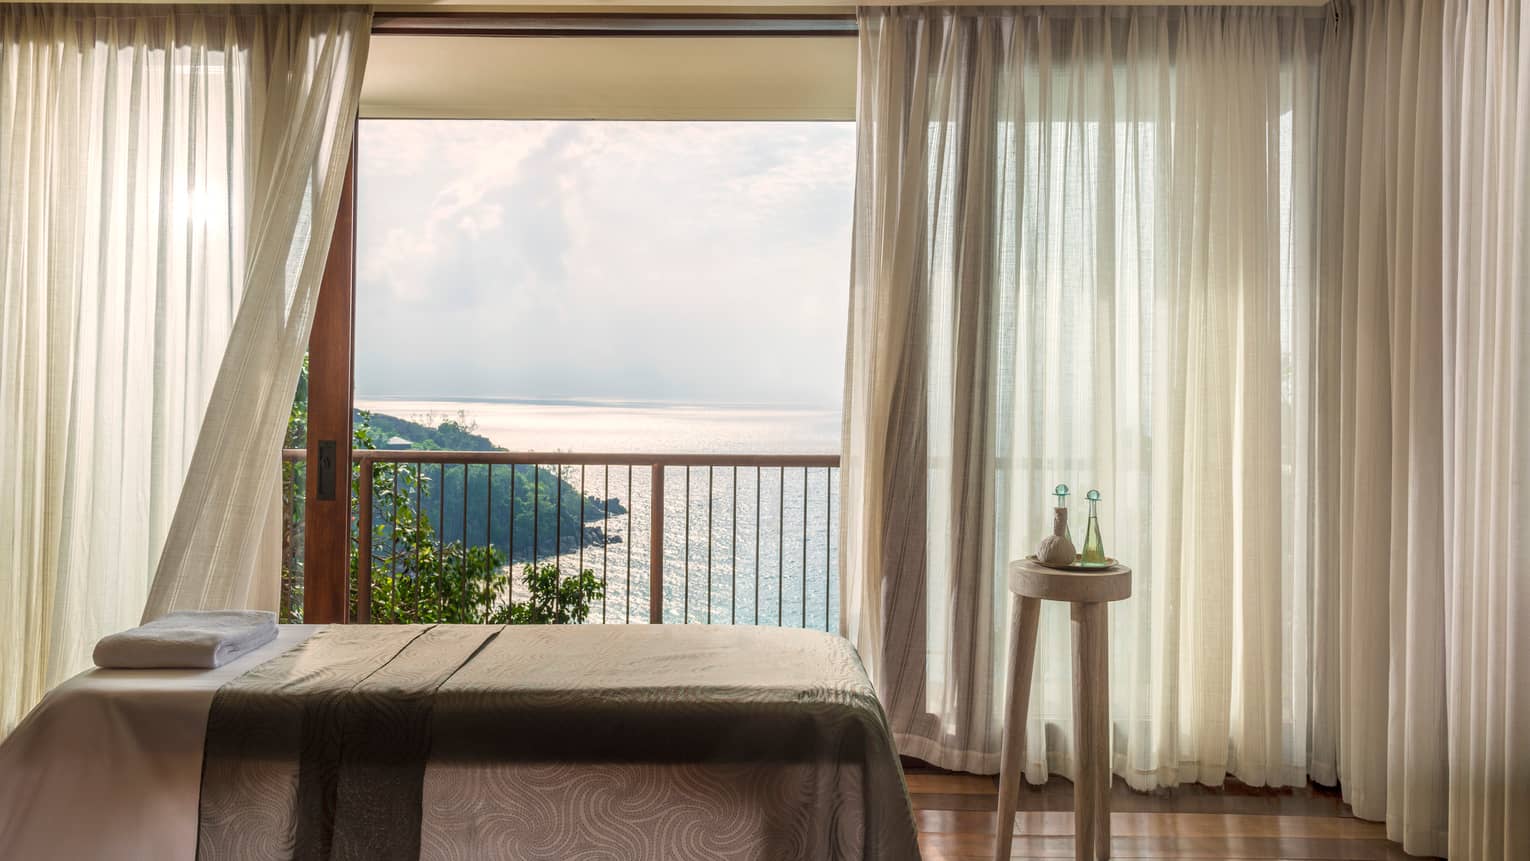 Massage bed in front of open window with long white curtains, ocean view 